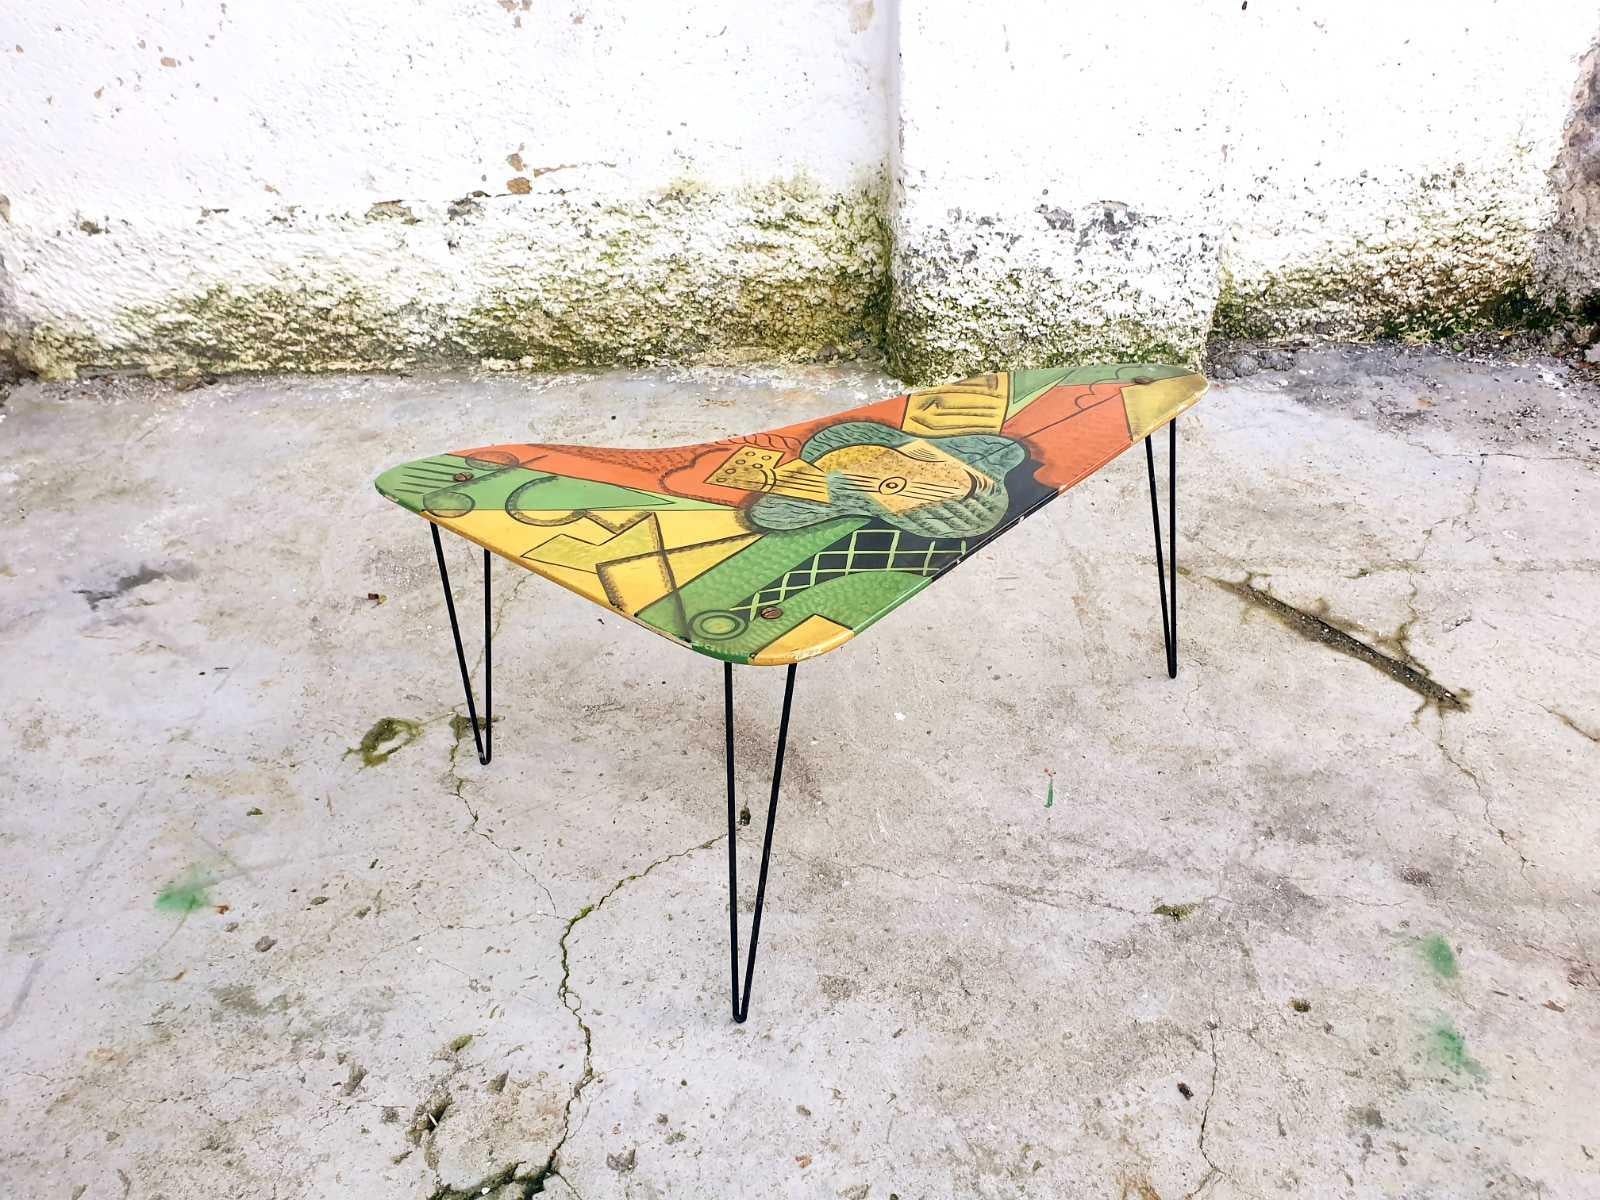 Very Unique and Rare Coffee Table, with famous Picasso guitar on the top. It is made in France in '60s, by unknown artist.

The Table is made of three black metal legs and painted top.
This Coffee Table table is in good vintage condition, with small